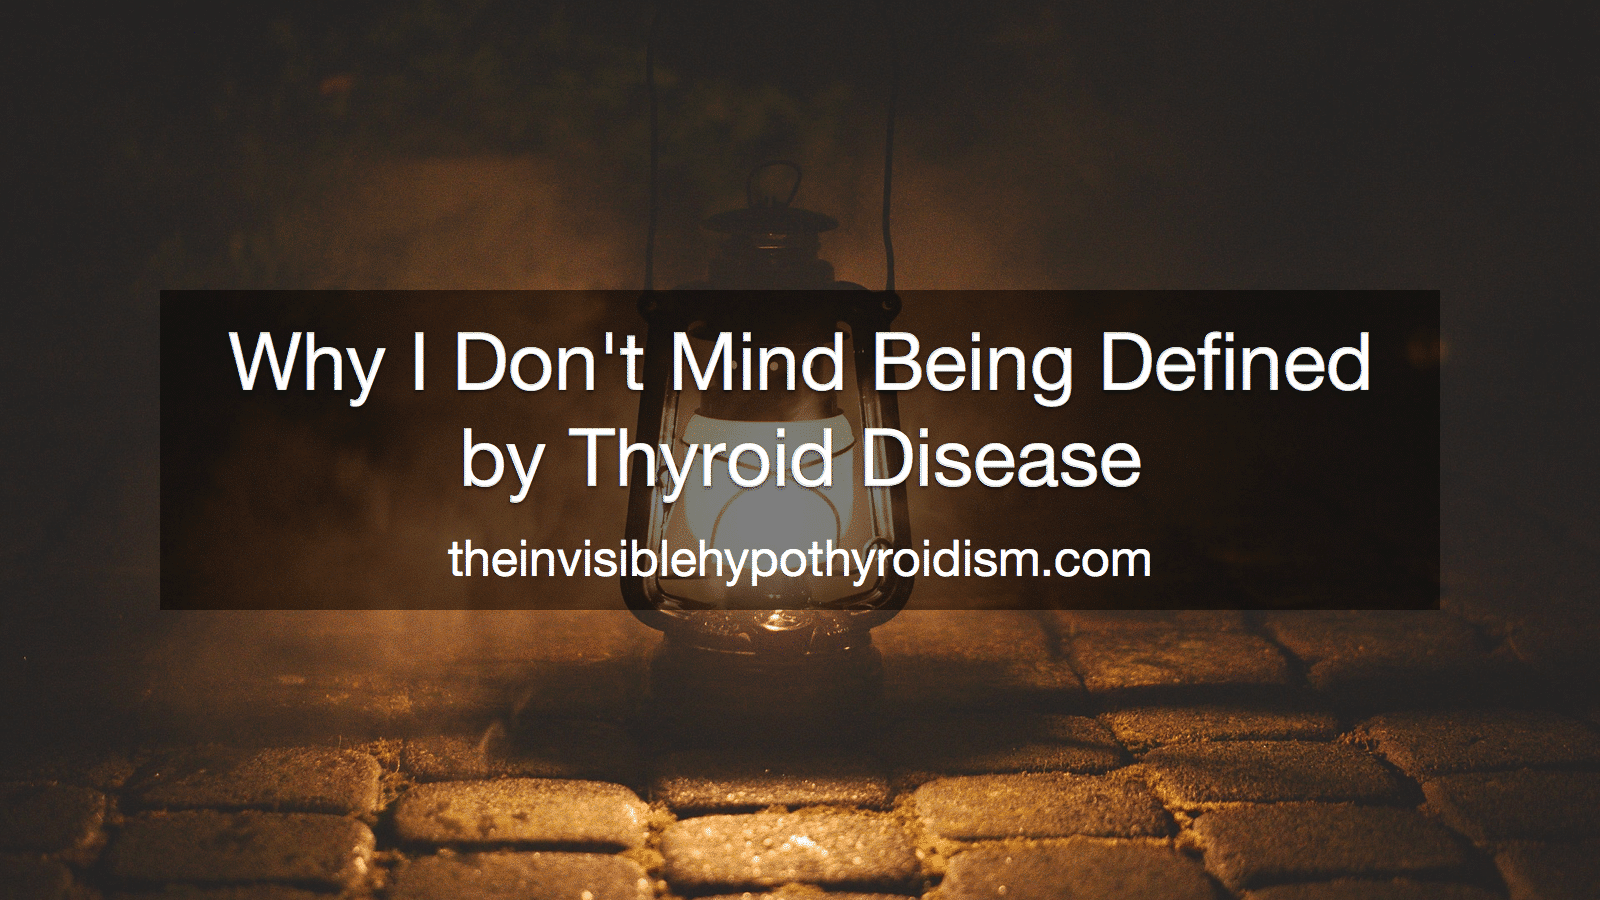 Why I Don't Mind Being Defined by Thyroid Disease